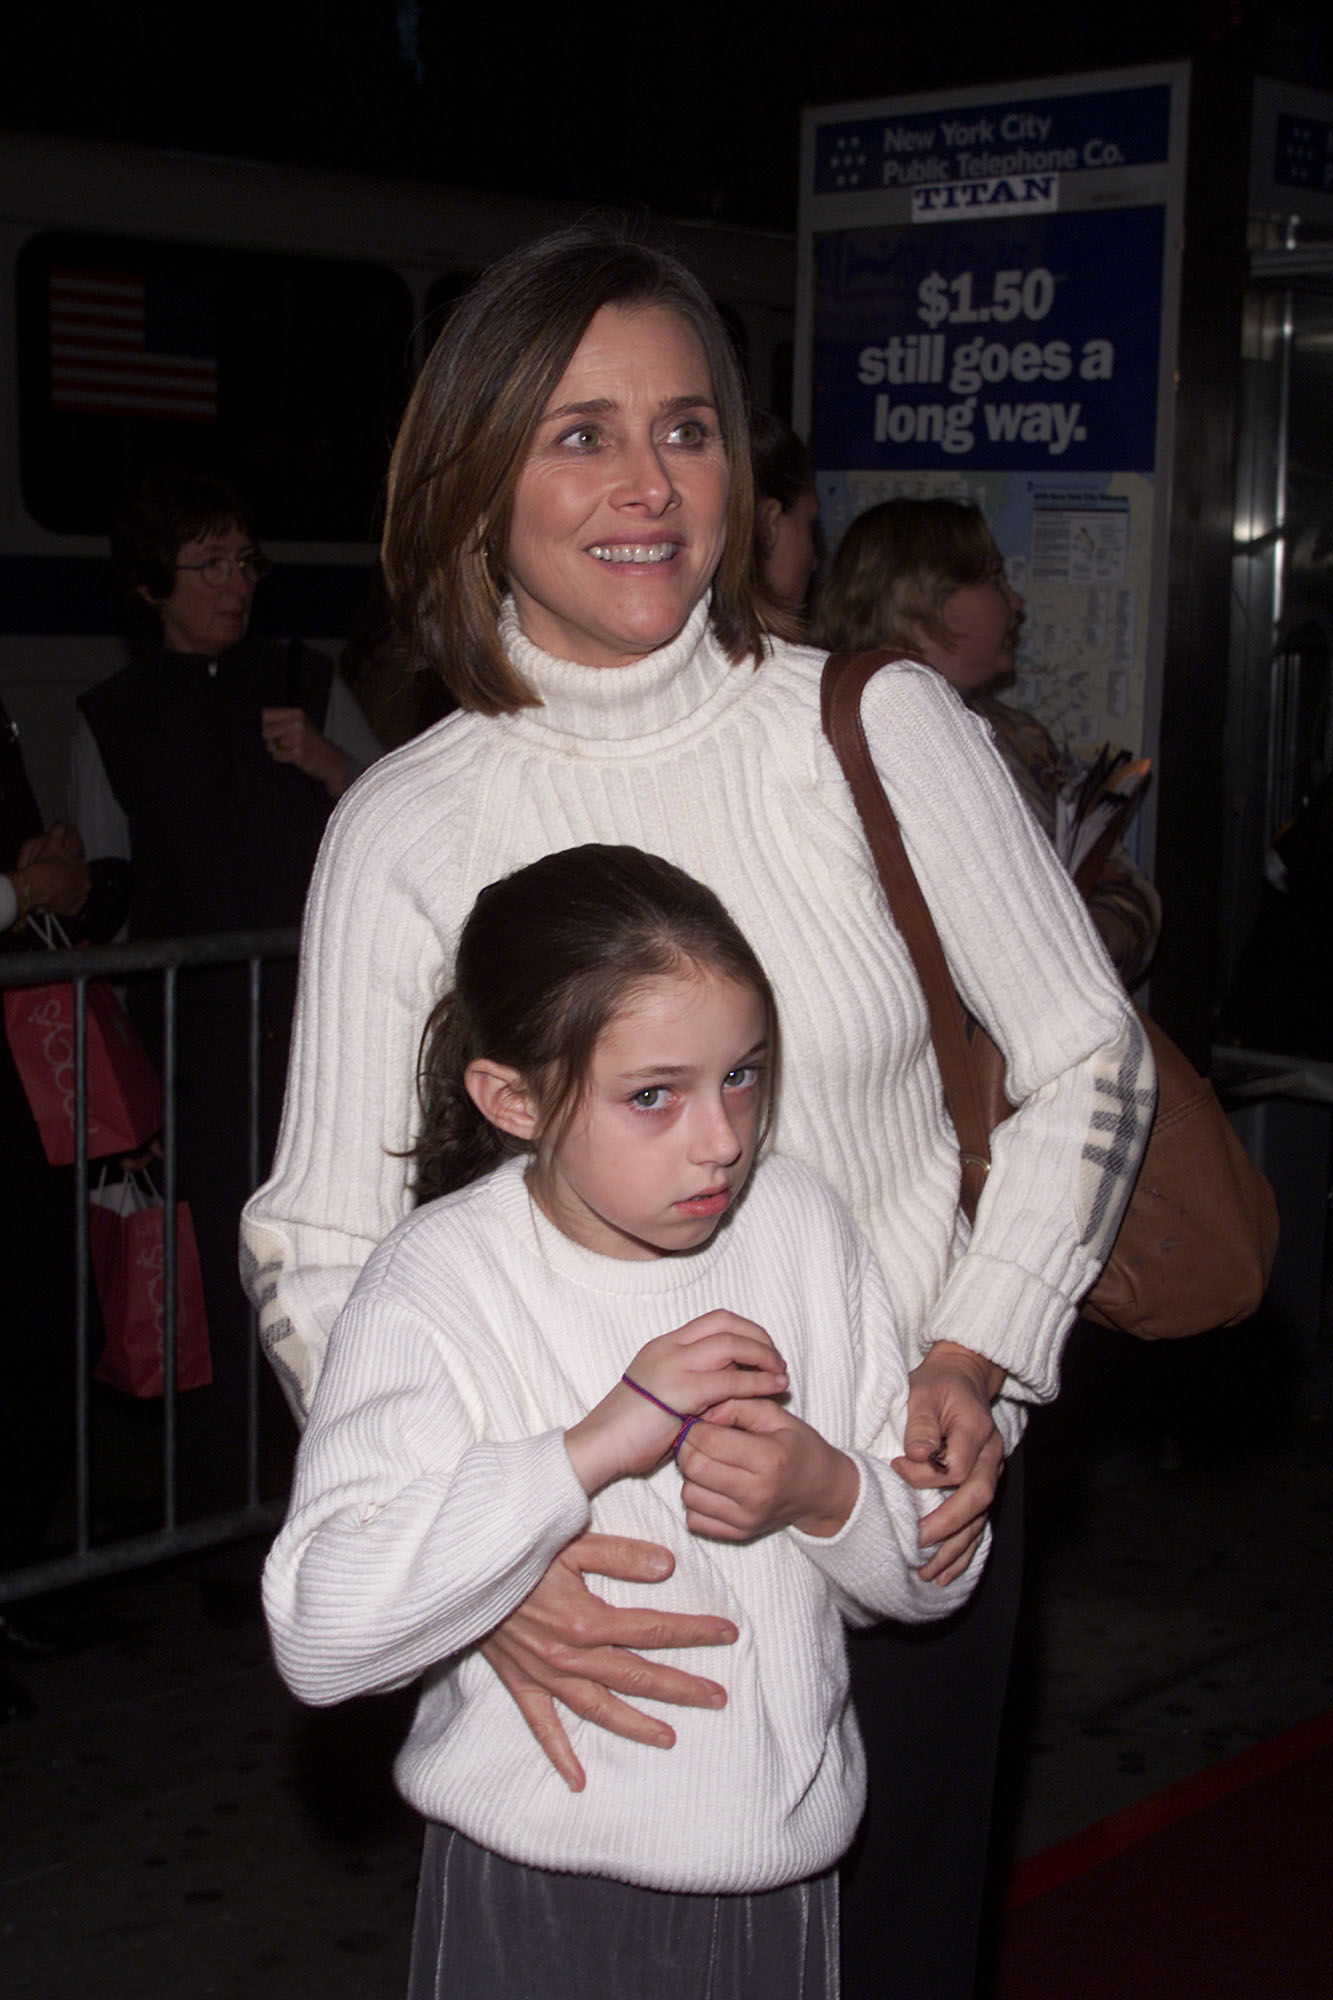 Meredith Vieira and Lily arrive for a special performance of 42nd Street, hosted by Julie Andrews at the Ford Center for the Performing Arts in New York City on November 27, 2001. | Source: Getty Images